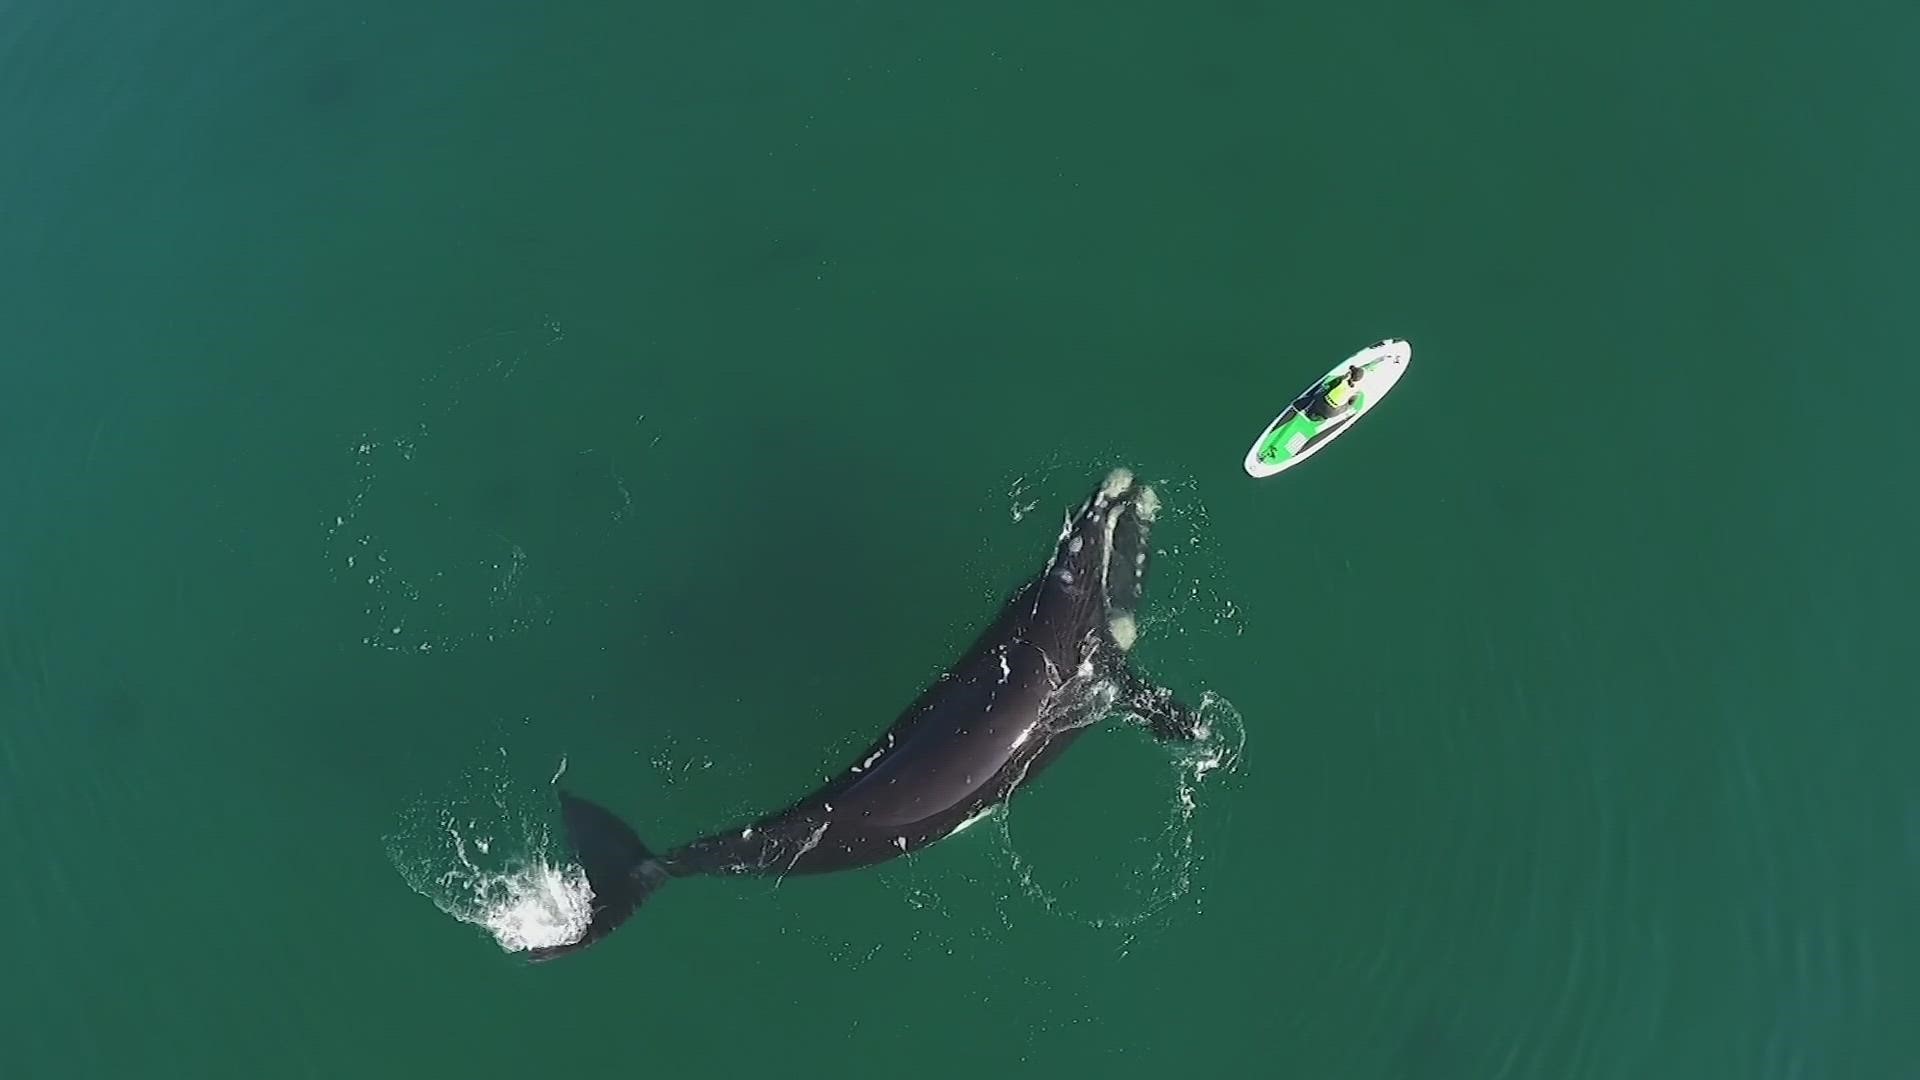 A rare encounter was caught on video when a Southern RIght whale seemingly plays with a woman on a paddleboard